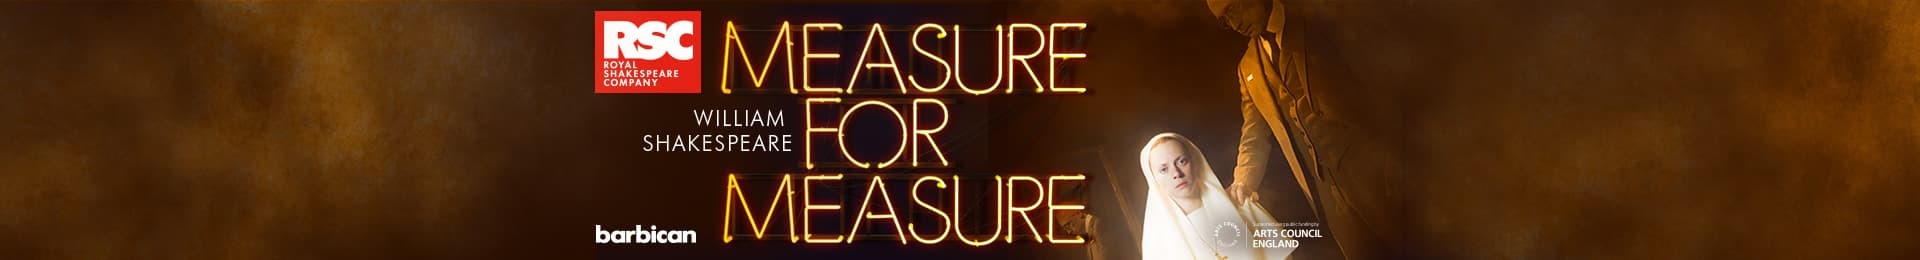 Measure for Measure banner image